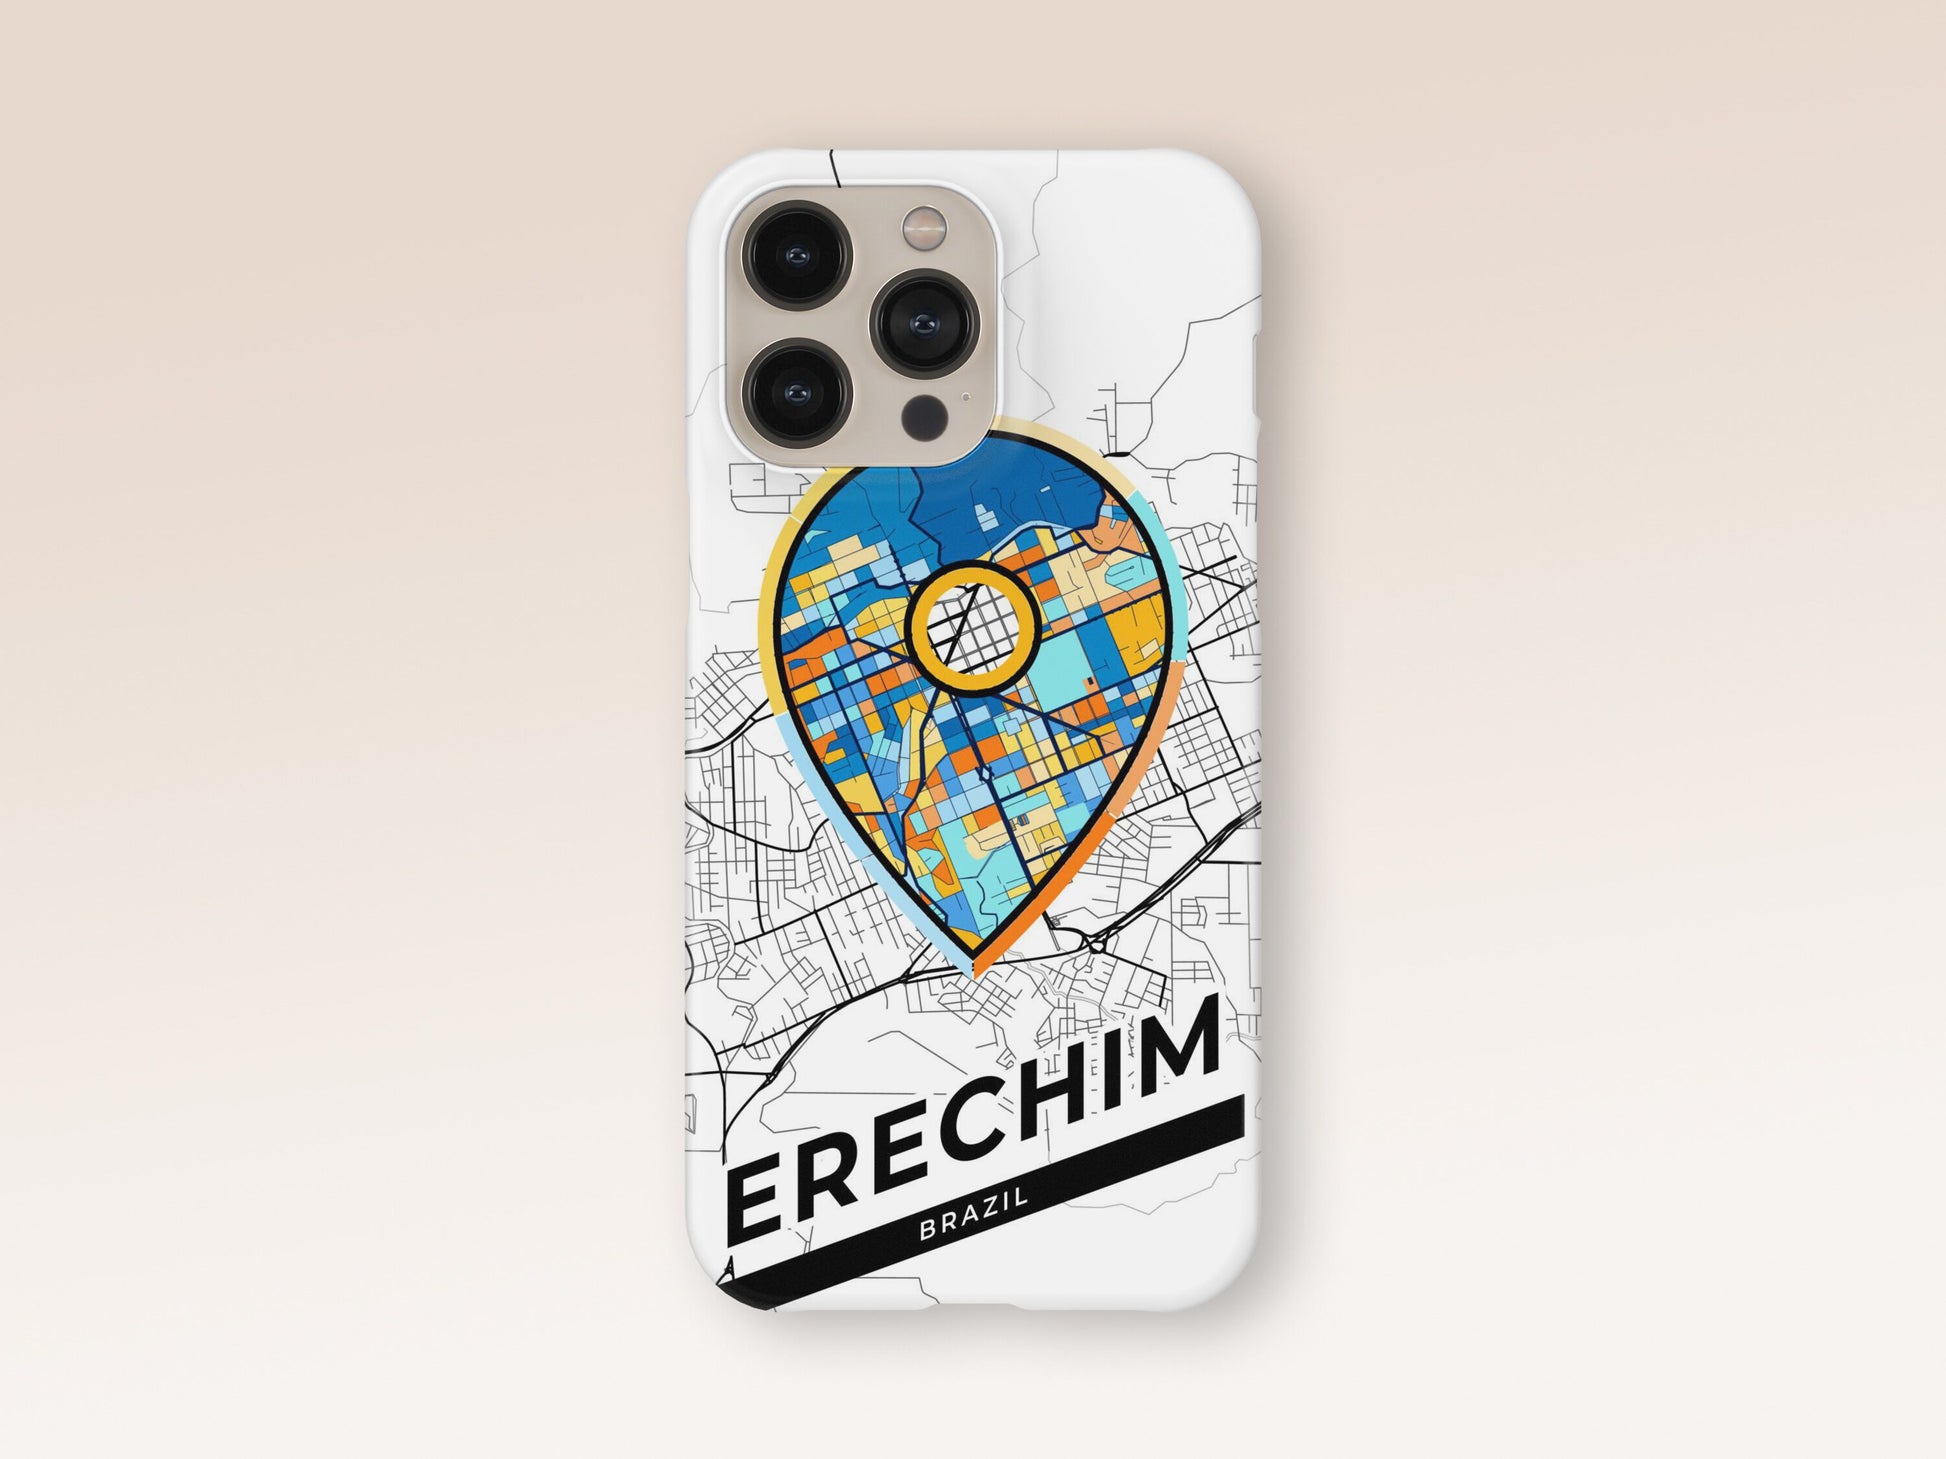 Erechim Brazil slim phone case with colorful icon. Birthday, wedding or housewarming gift. Couple match cases. 1